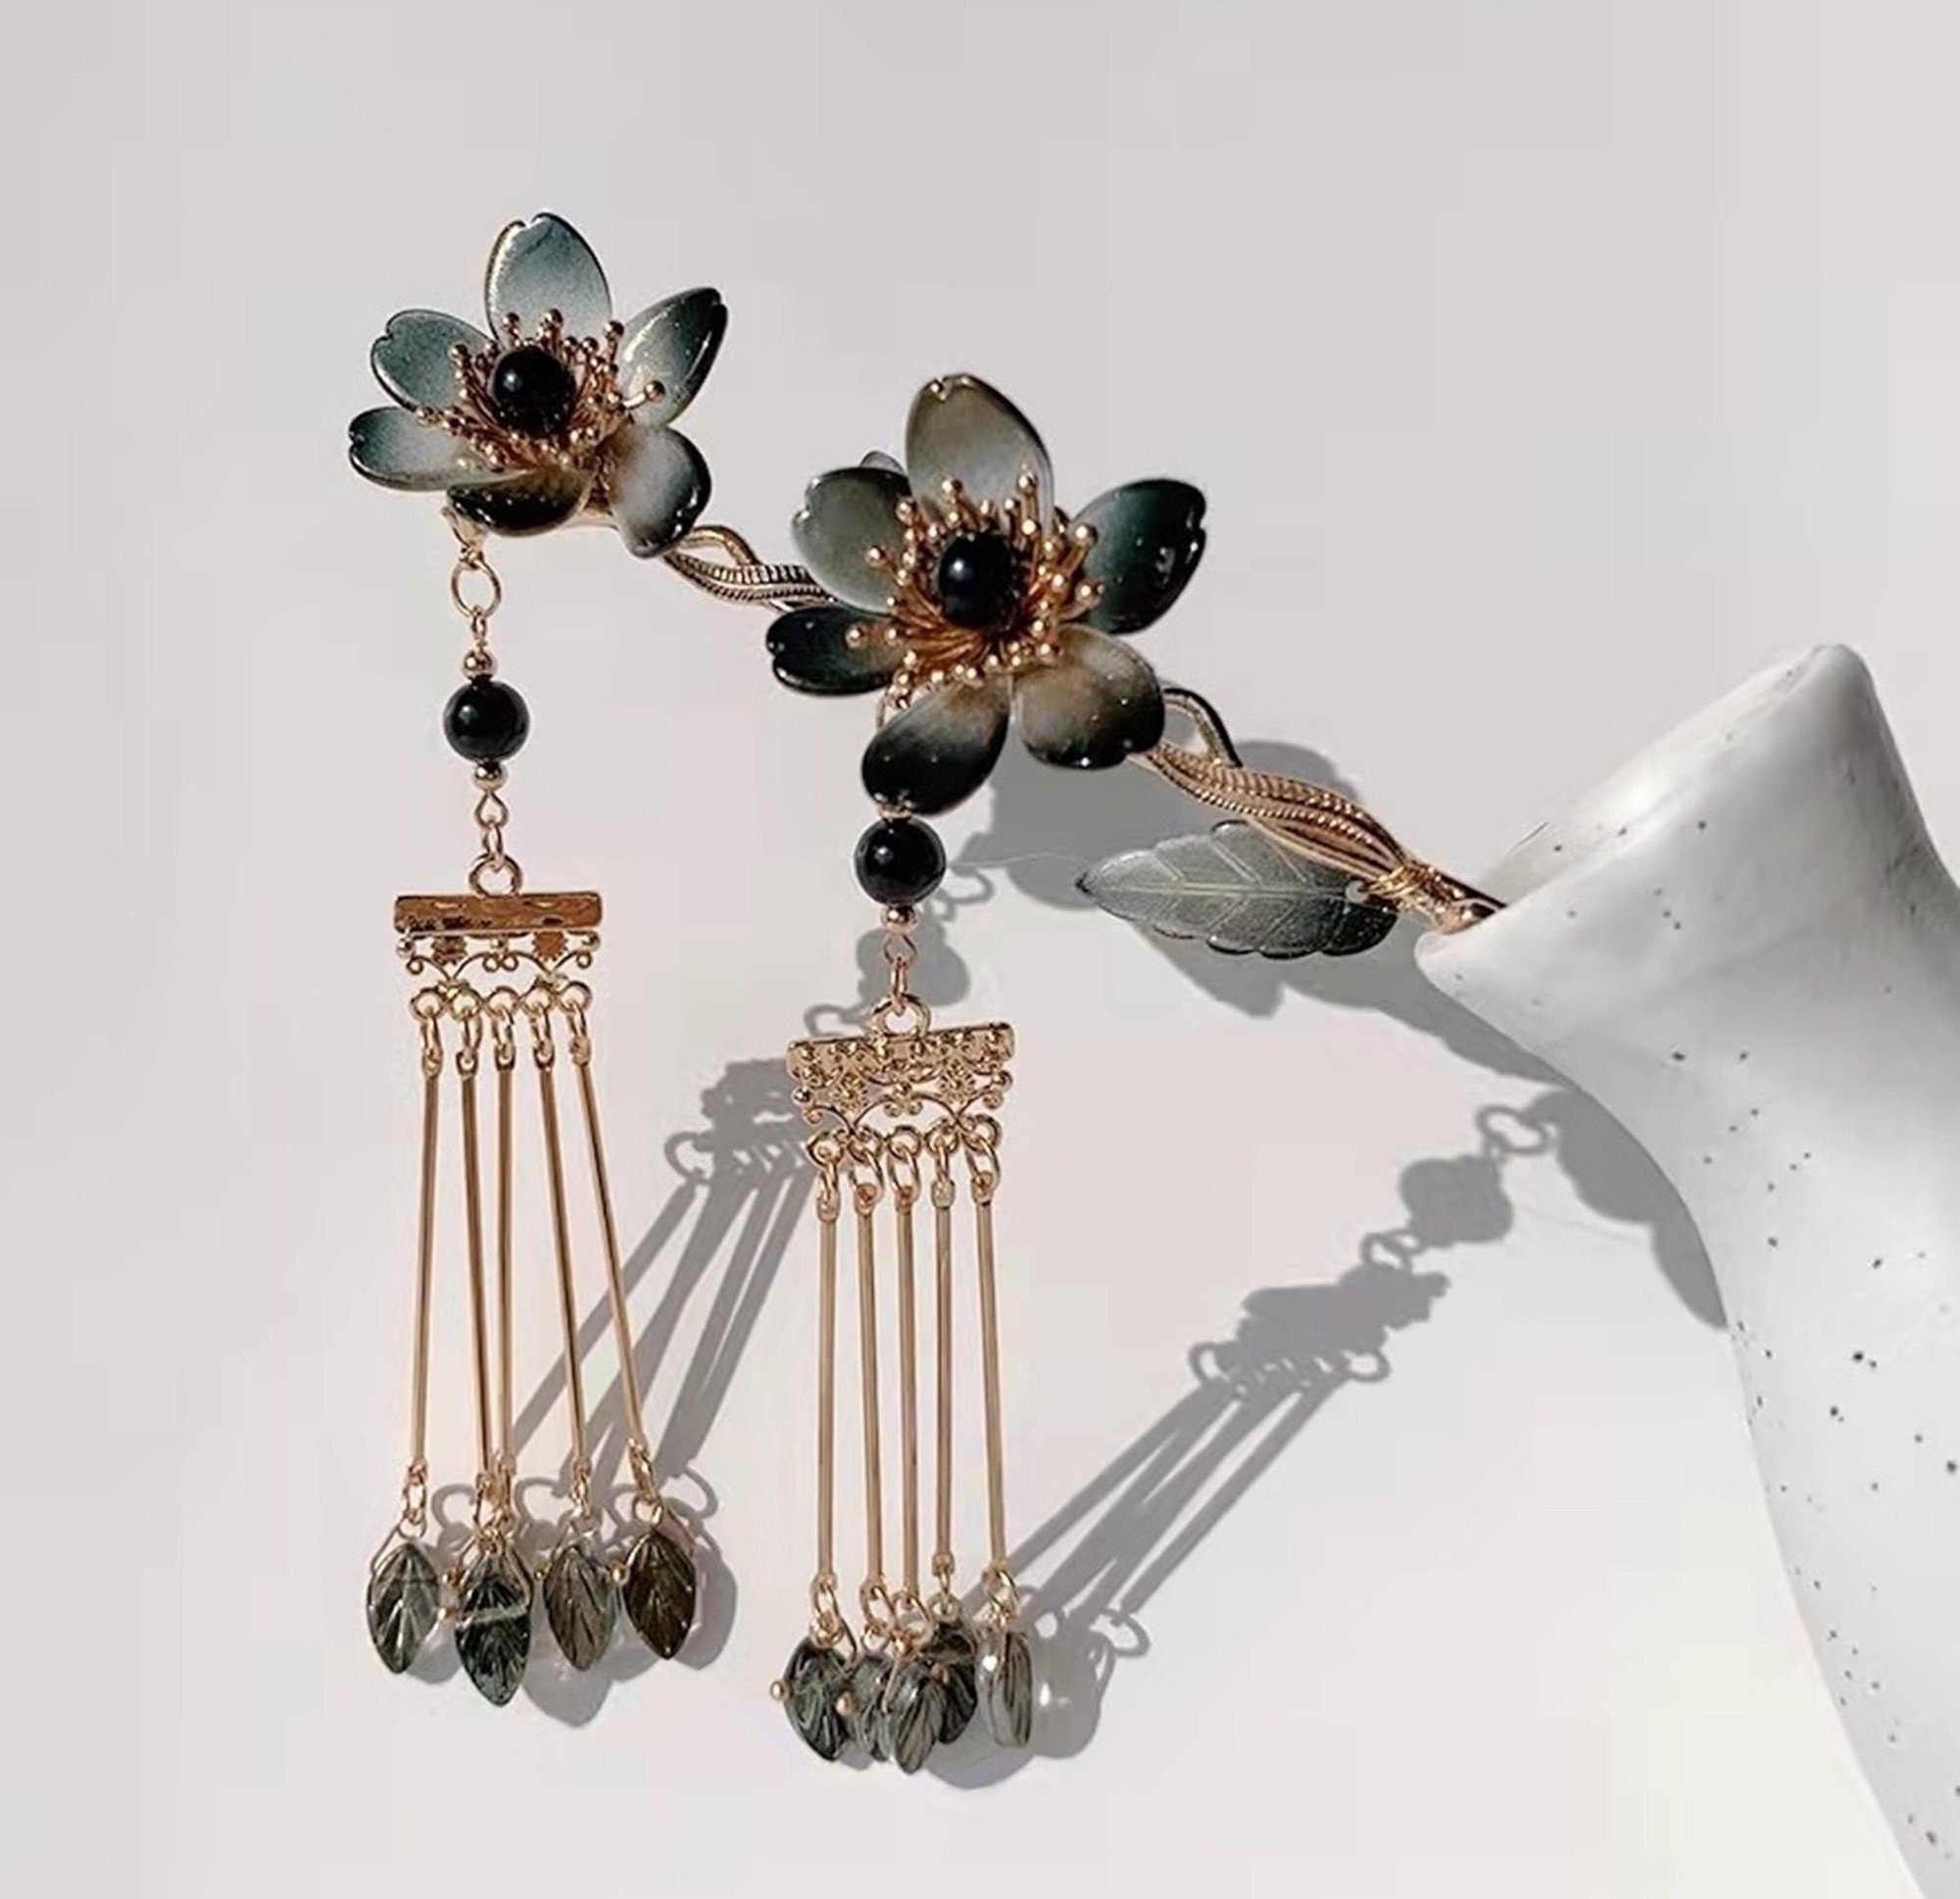 Gift Hair Jewelry-A056 Metal Hair Stick Fork Flower Hair Stick Vintage Chinese Hair Stick Hair Stick with Tassels